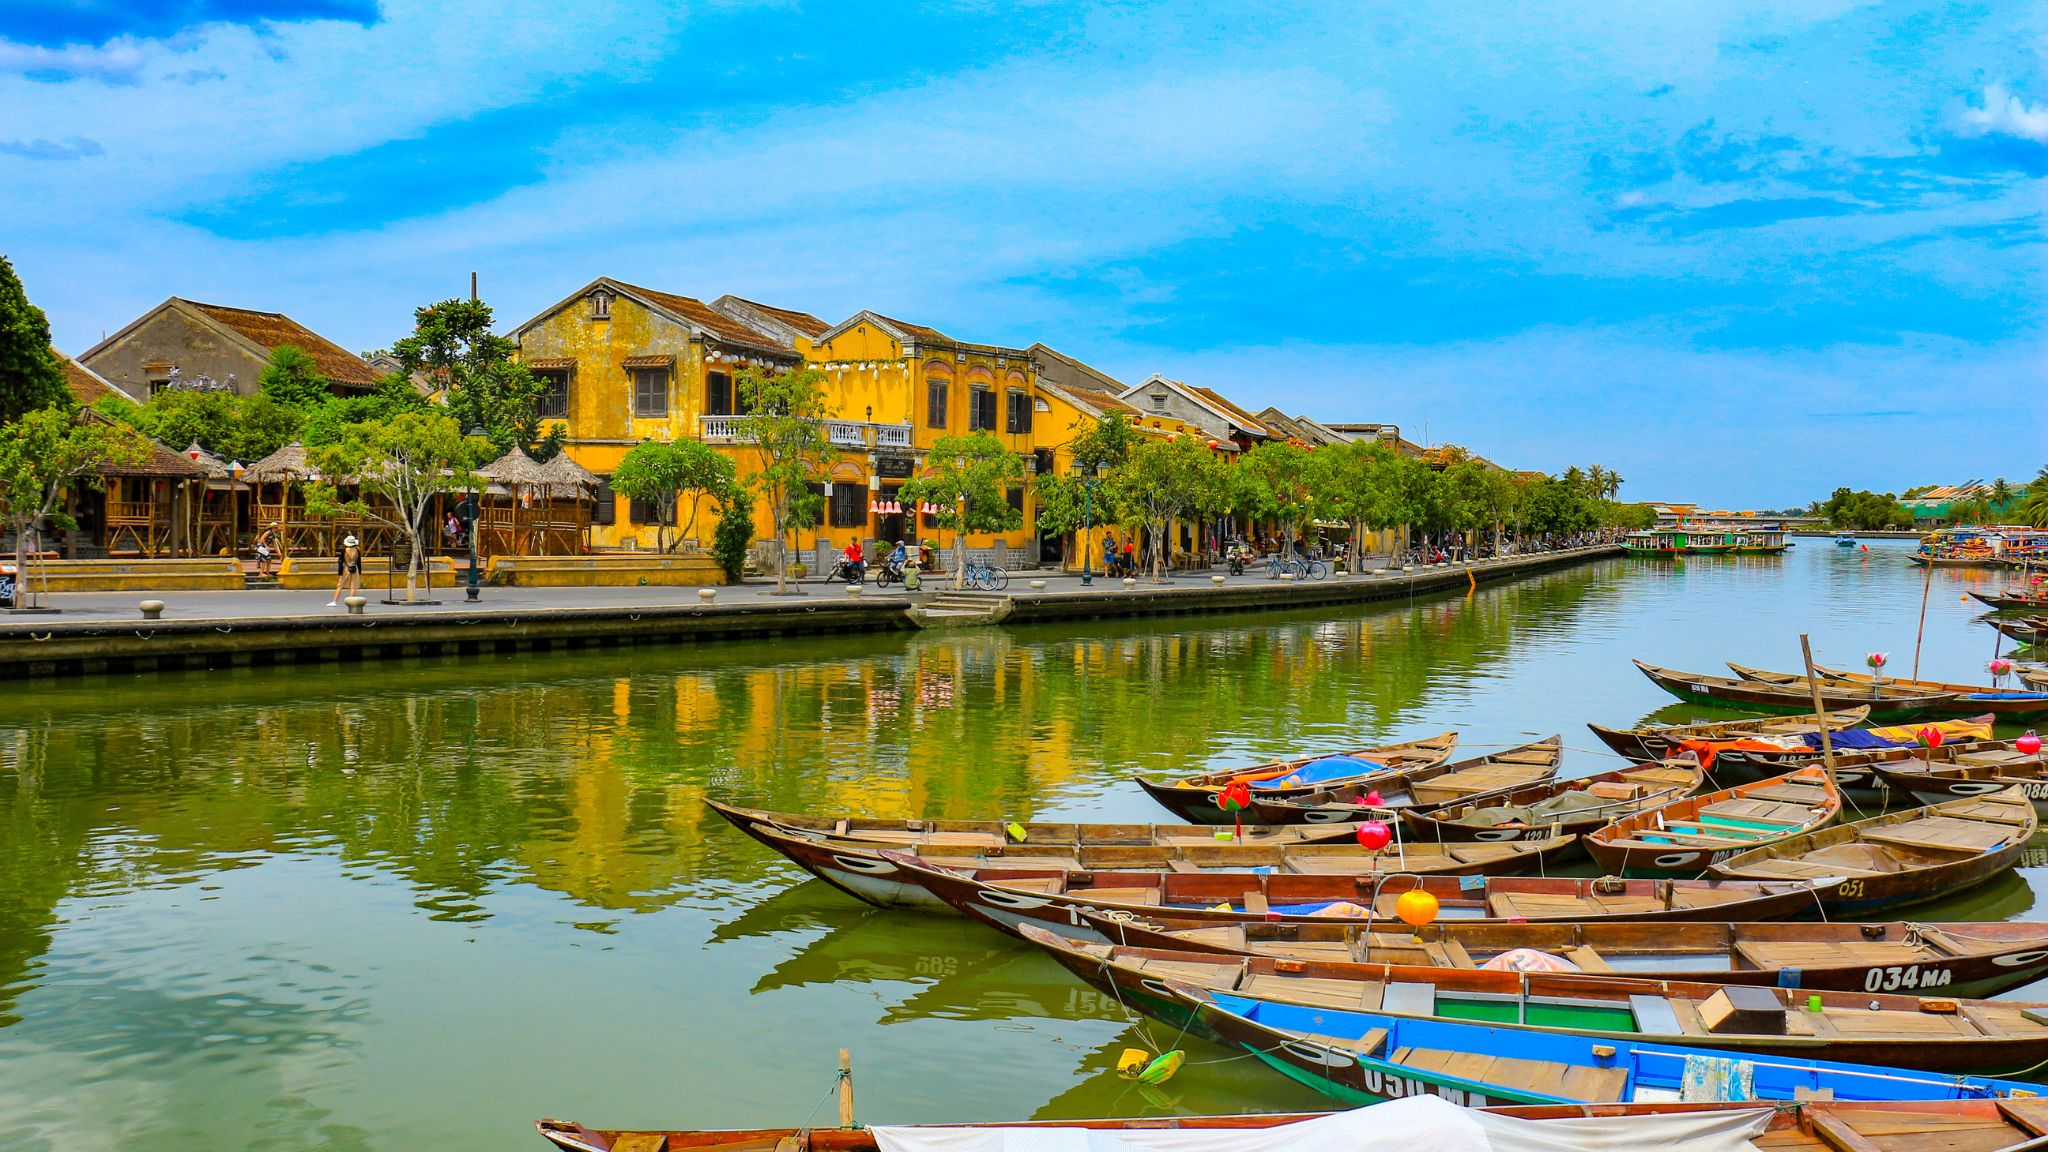 Day 10 Wander Around The Colorful Streets In Hoi An